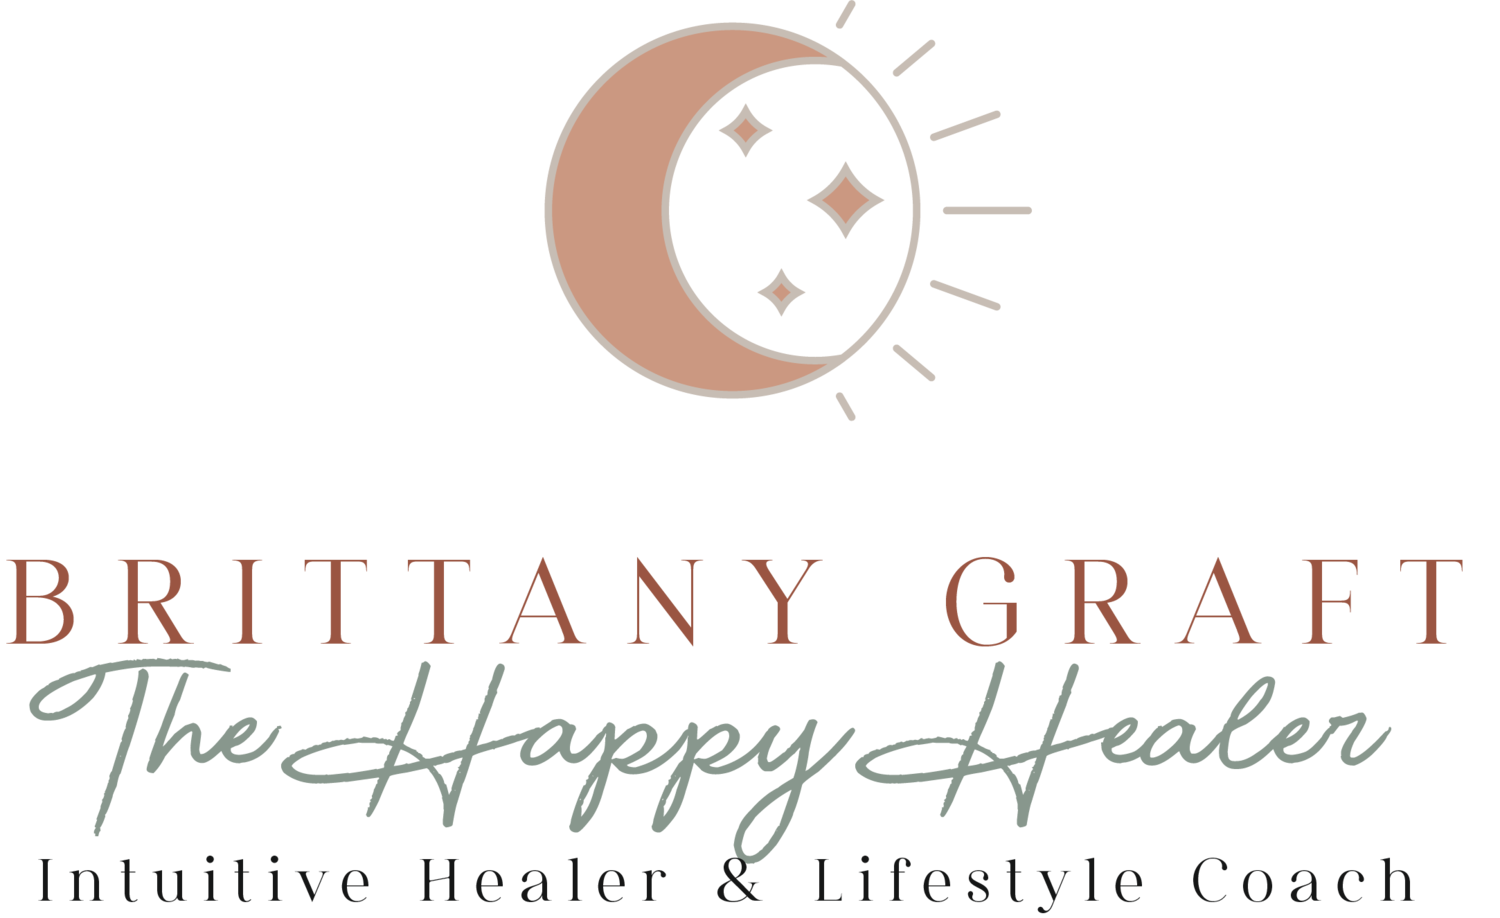 Brittany Graft | The Happy Healer